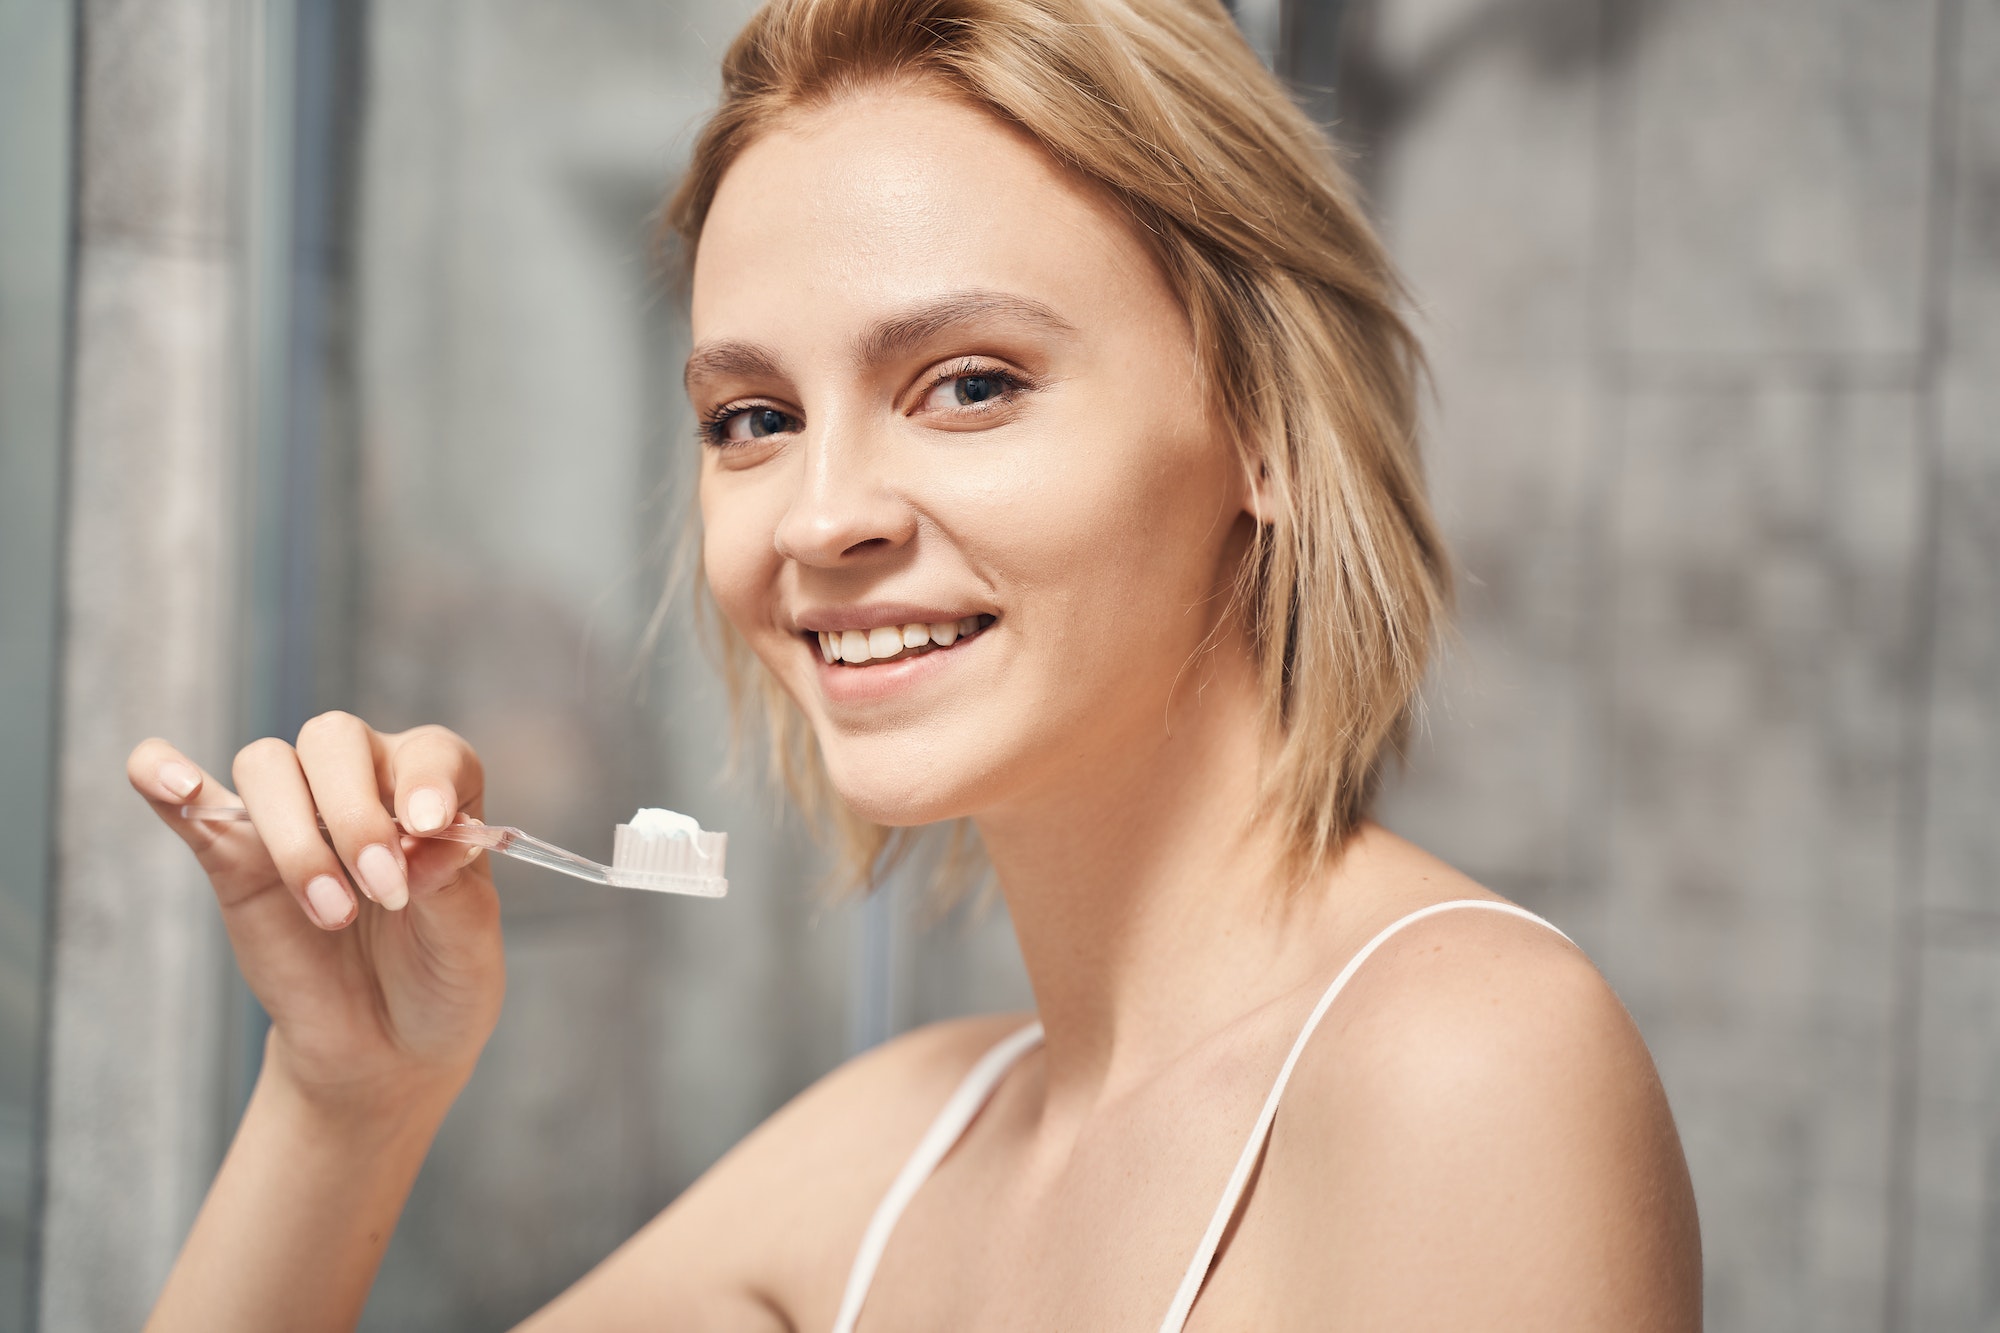 Joyous woman taking care of her oral health